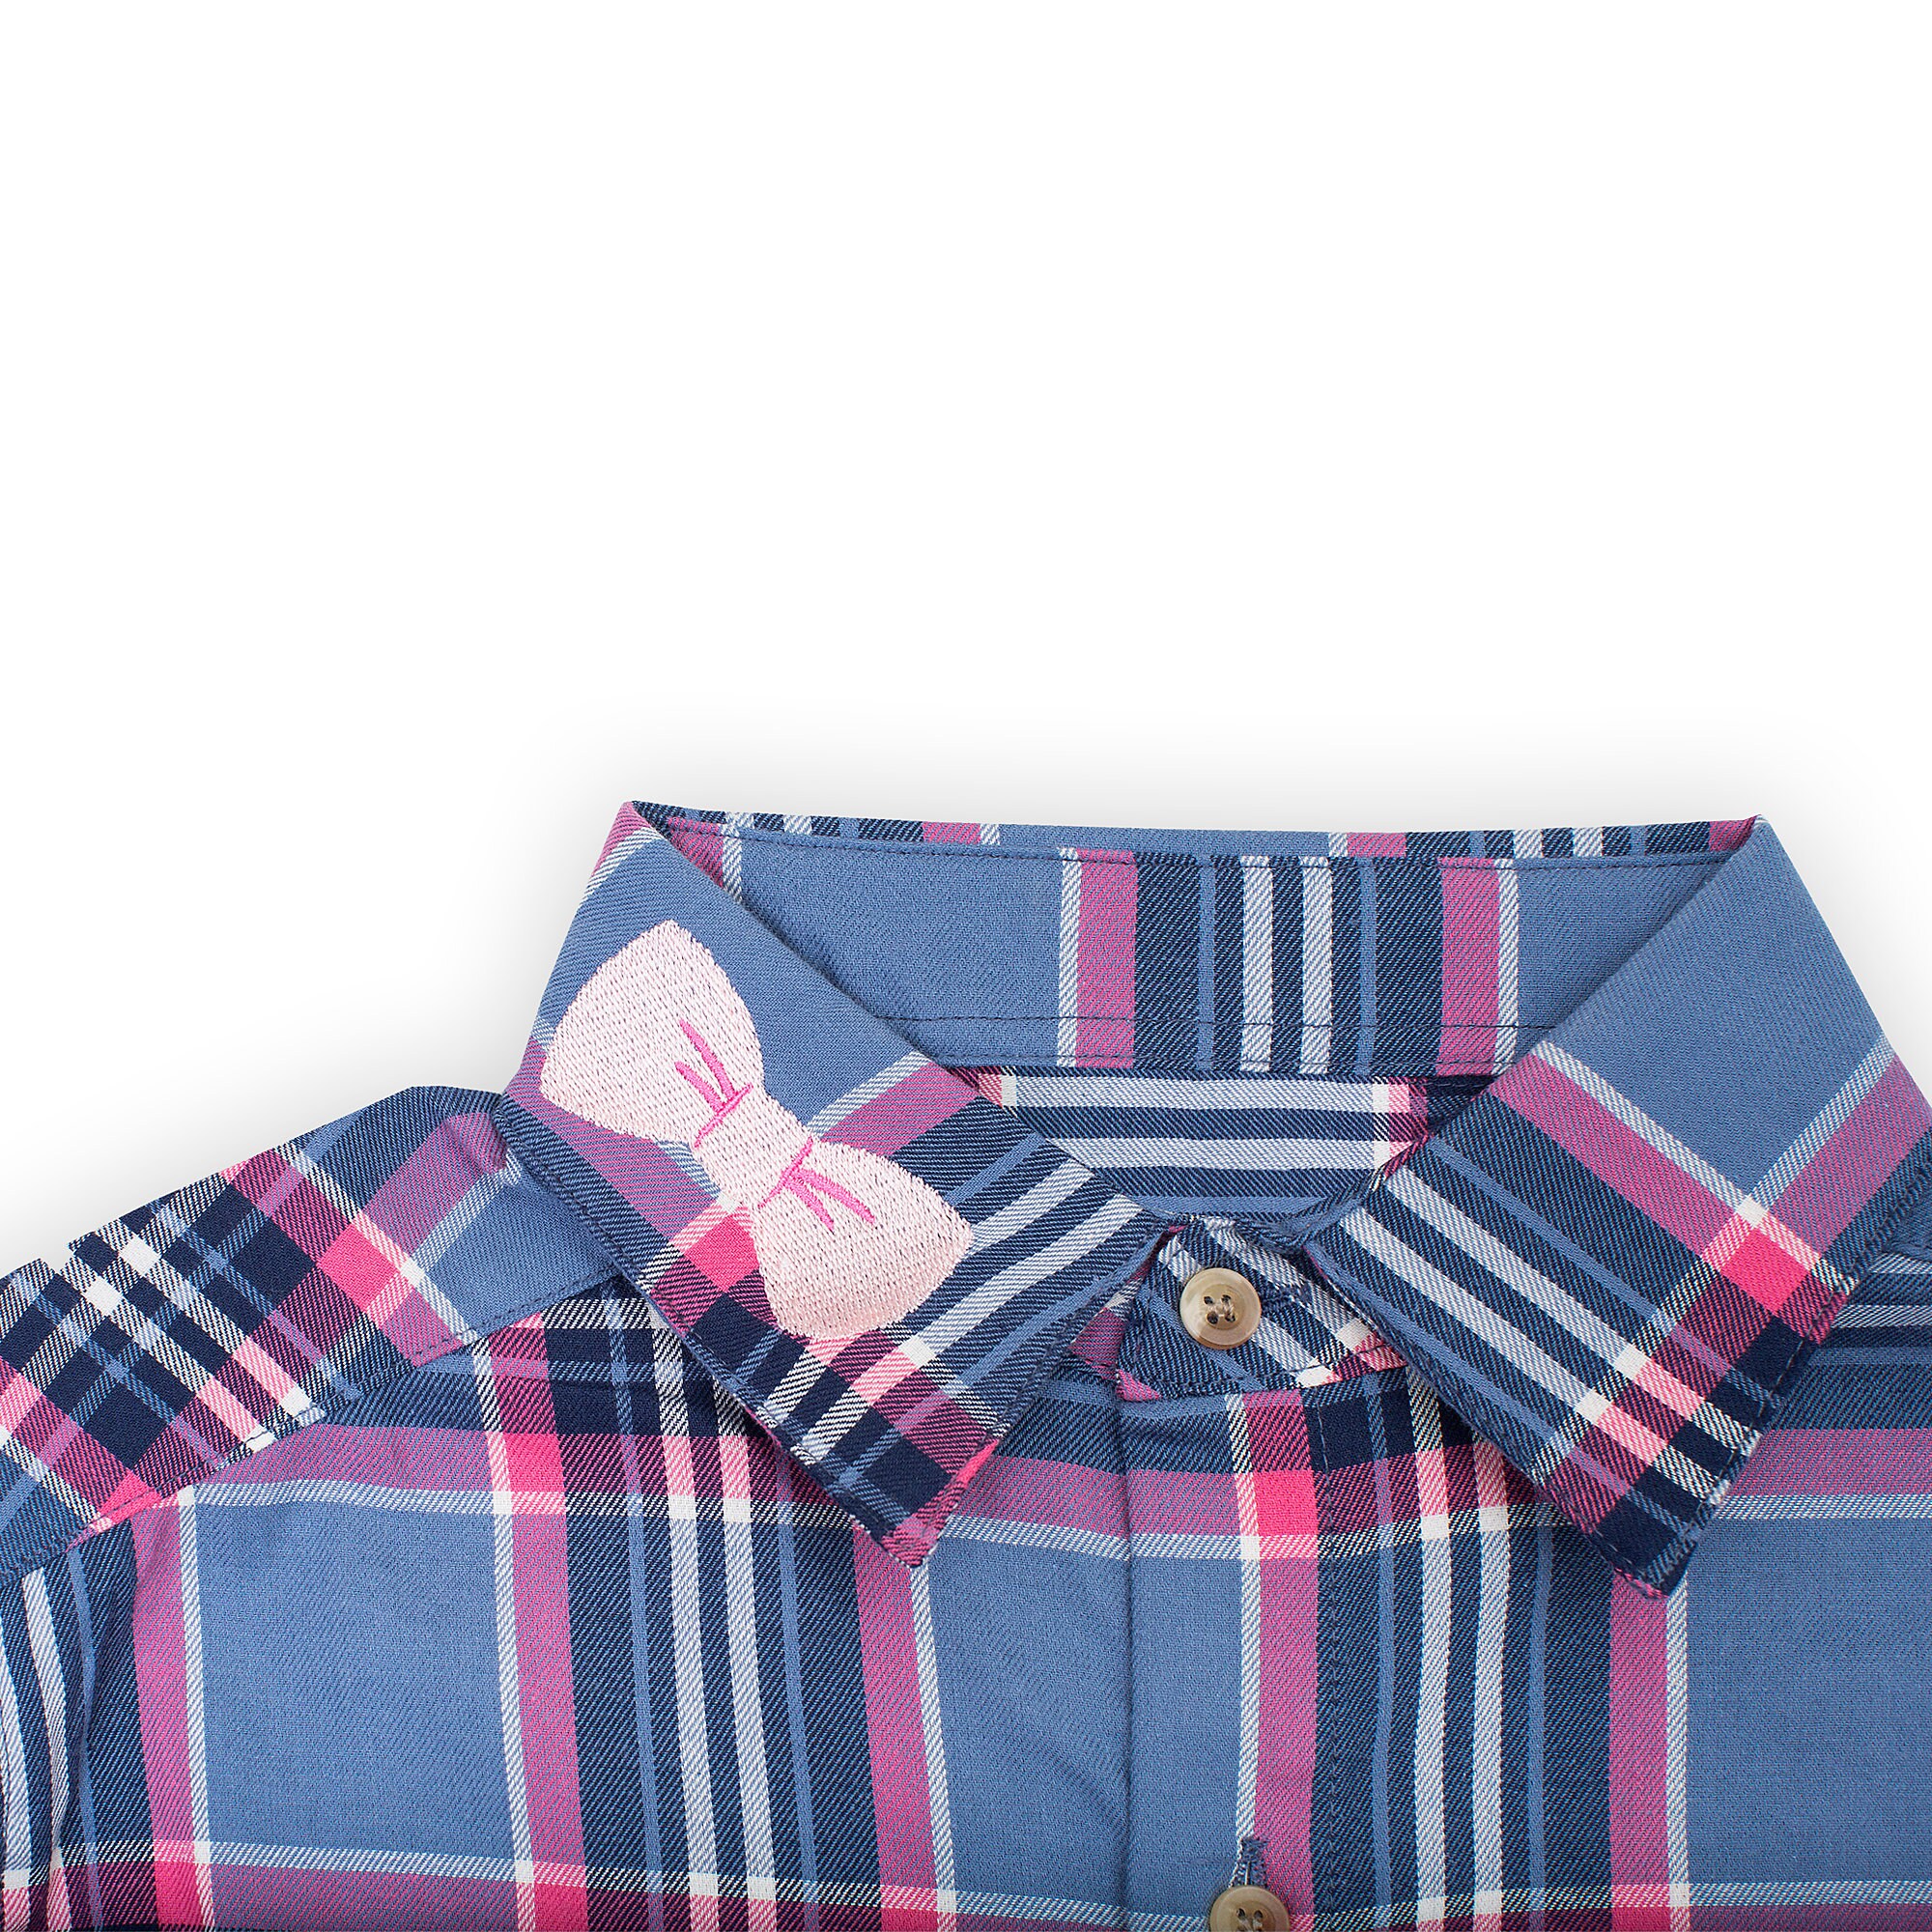 Bo Peep Flannel Shirt for Adults by Cakeworthy - Toy Story 4